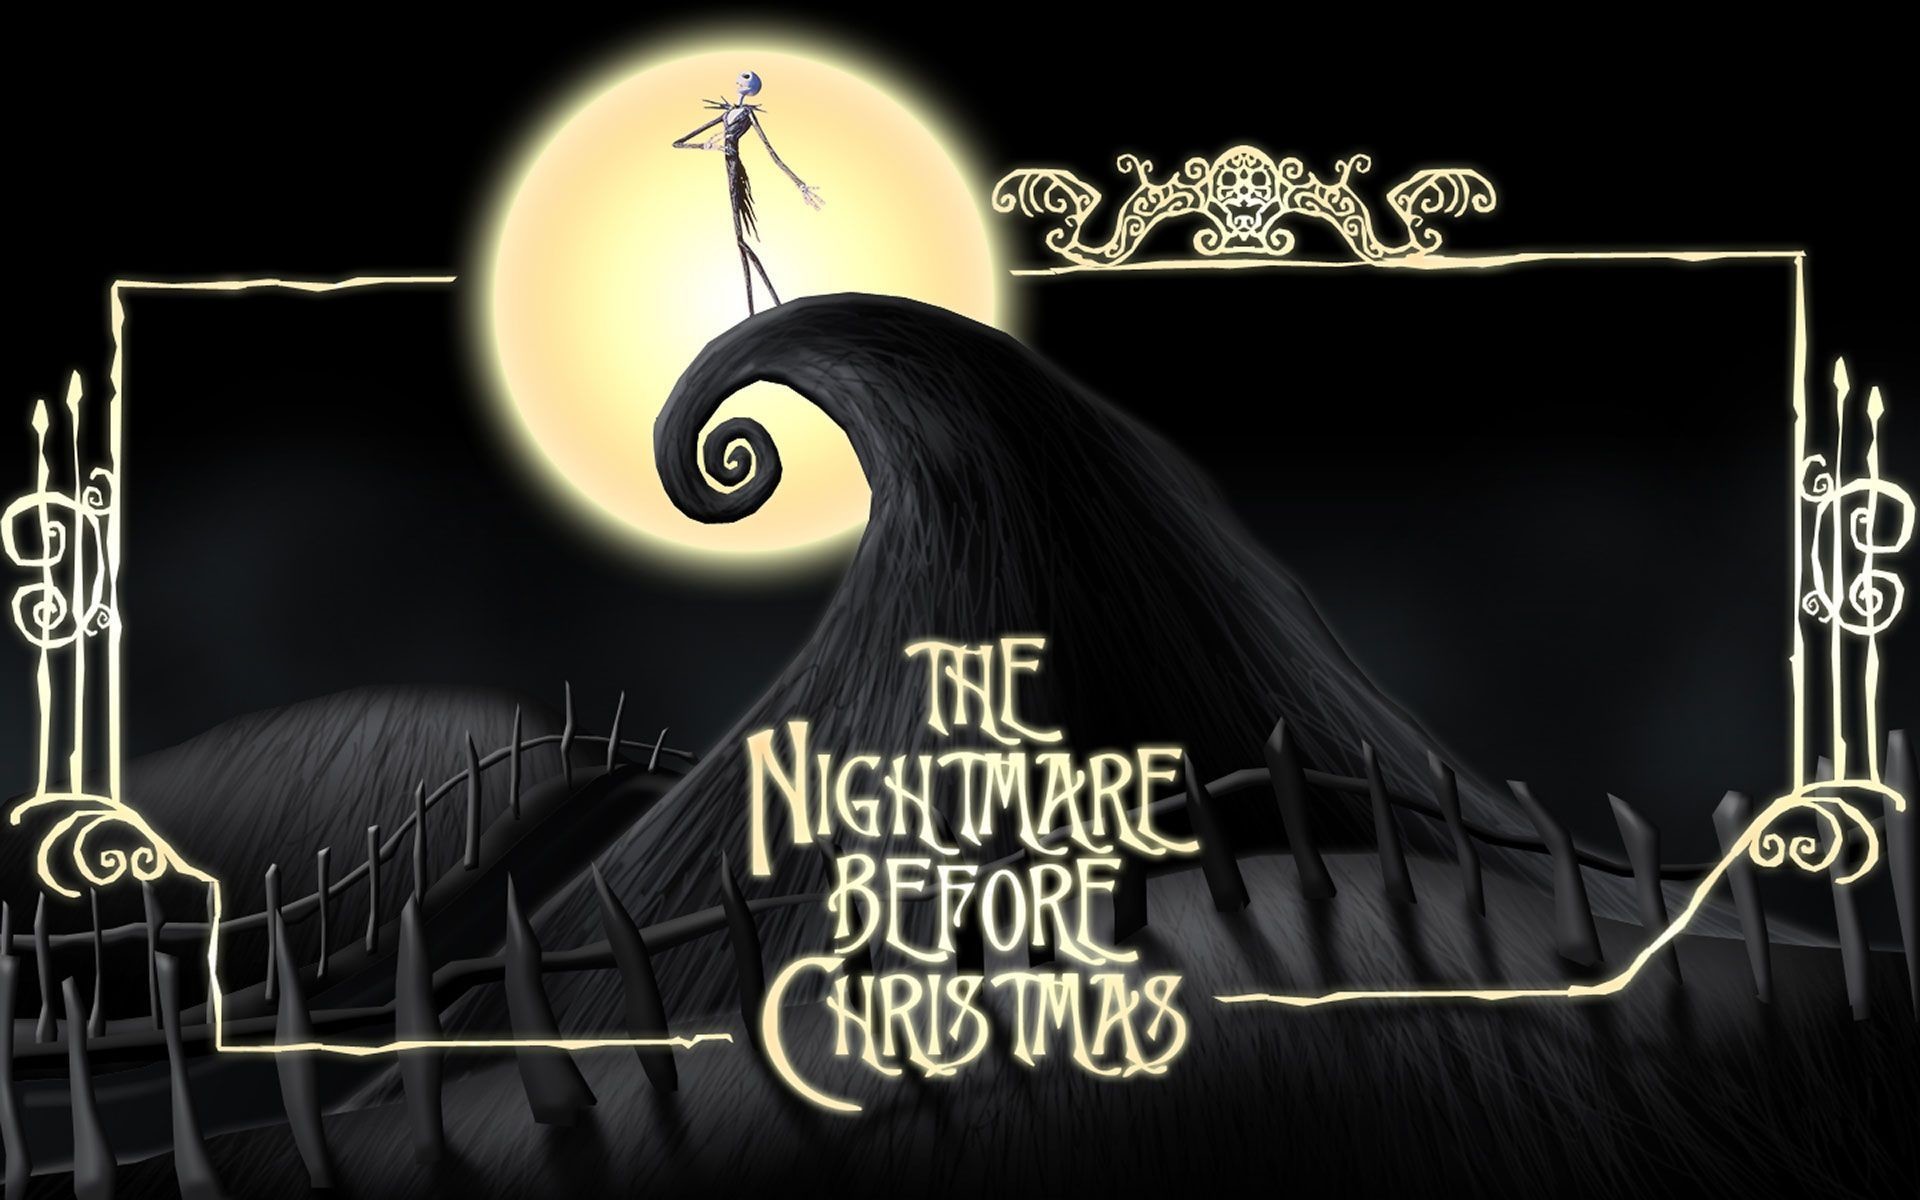 1920x1200 Nightmare Before Christmas Wallpapers HD - Wallpaper Cave